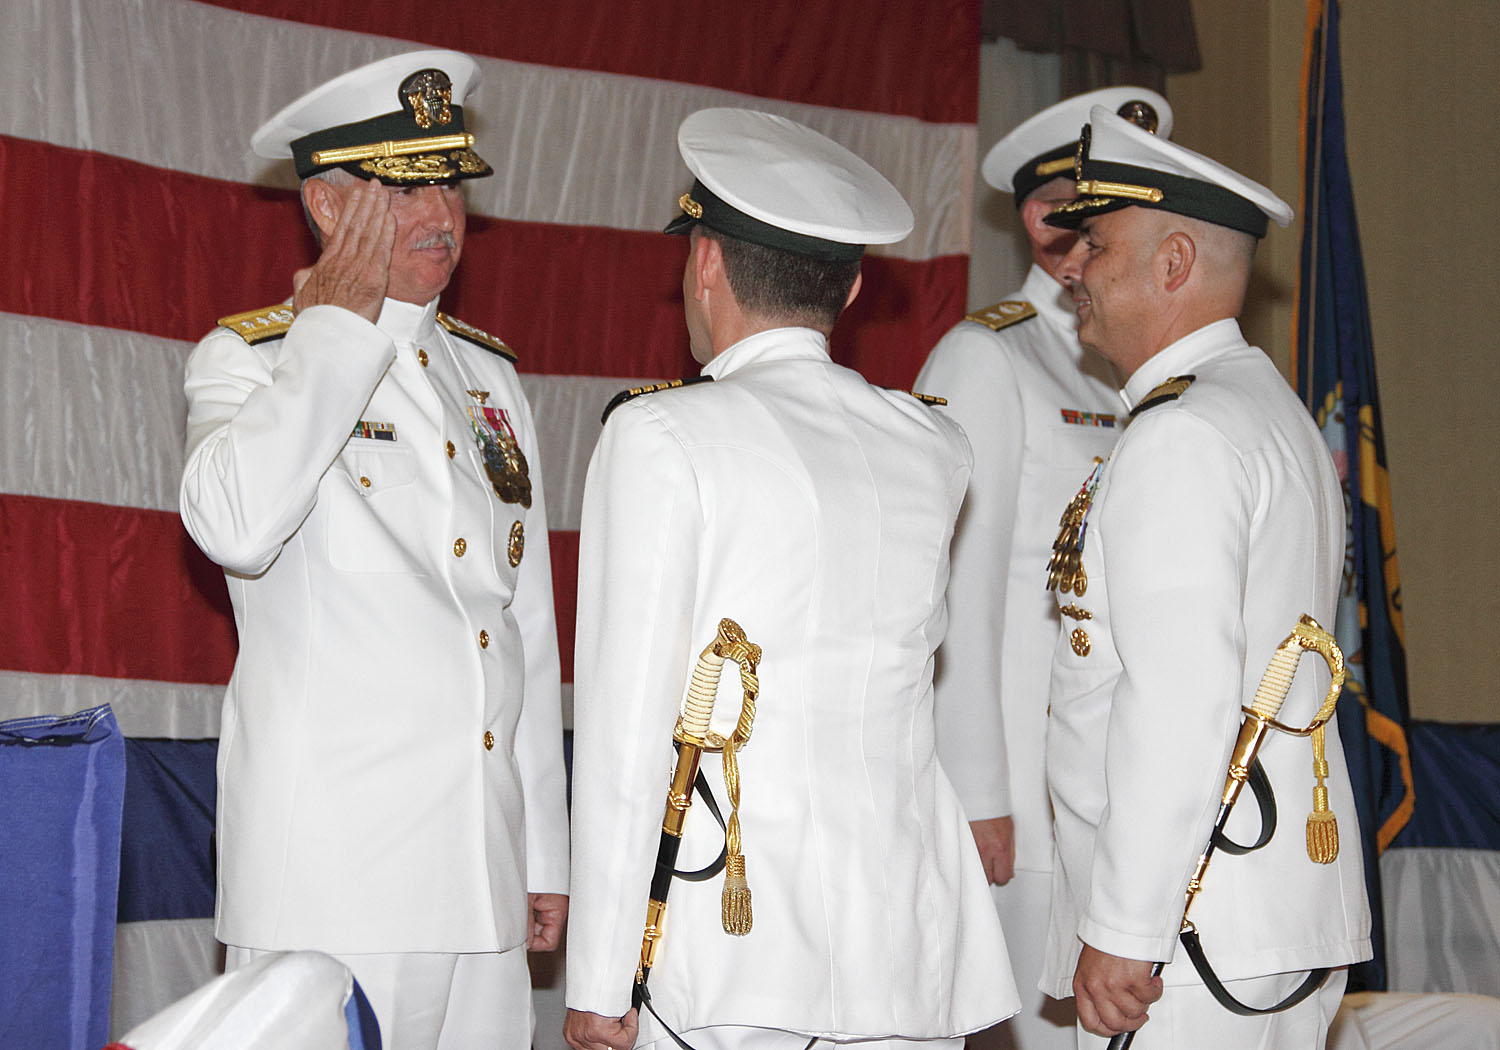 four military men in white uniforms standing next to a flag